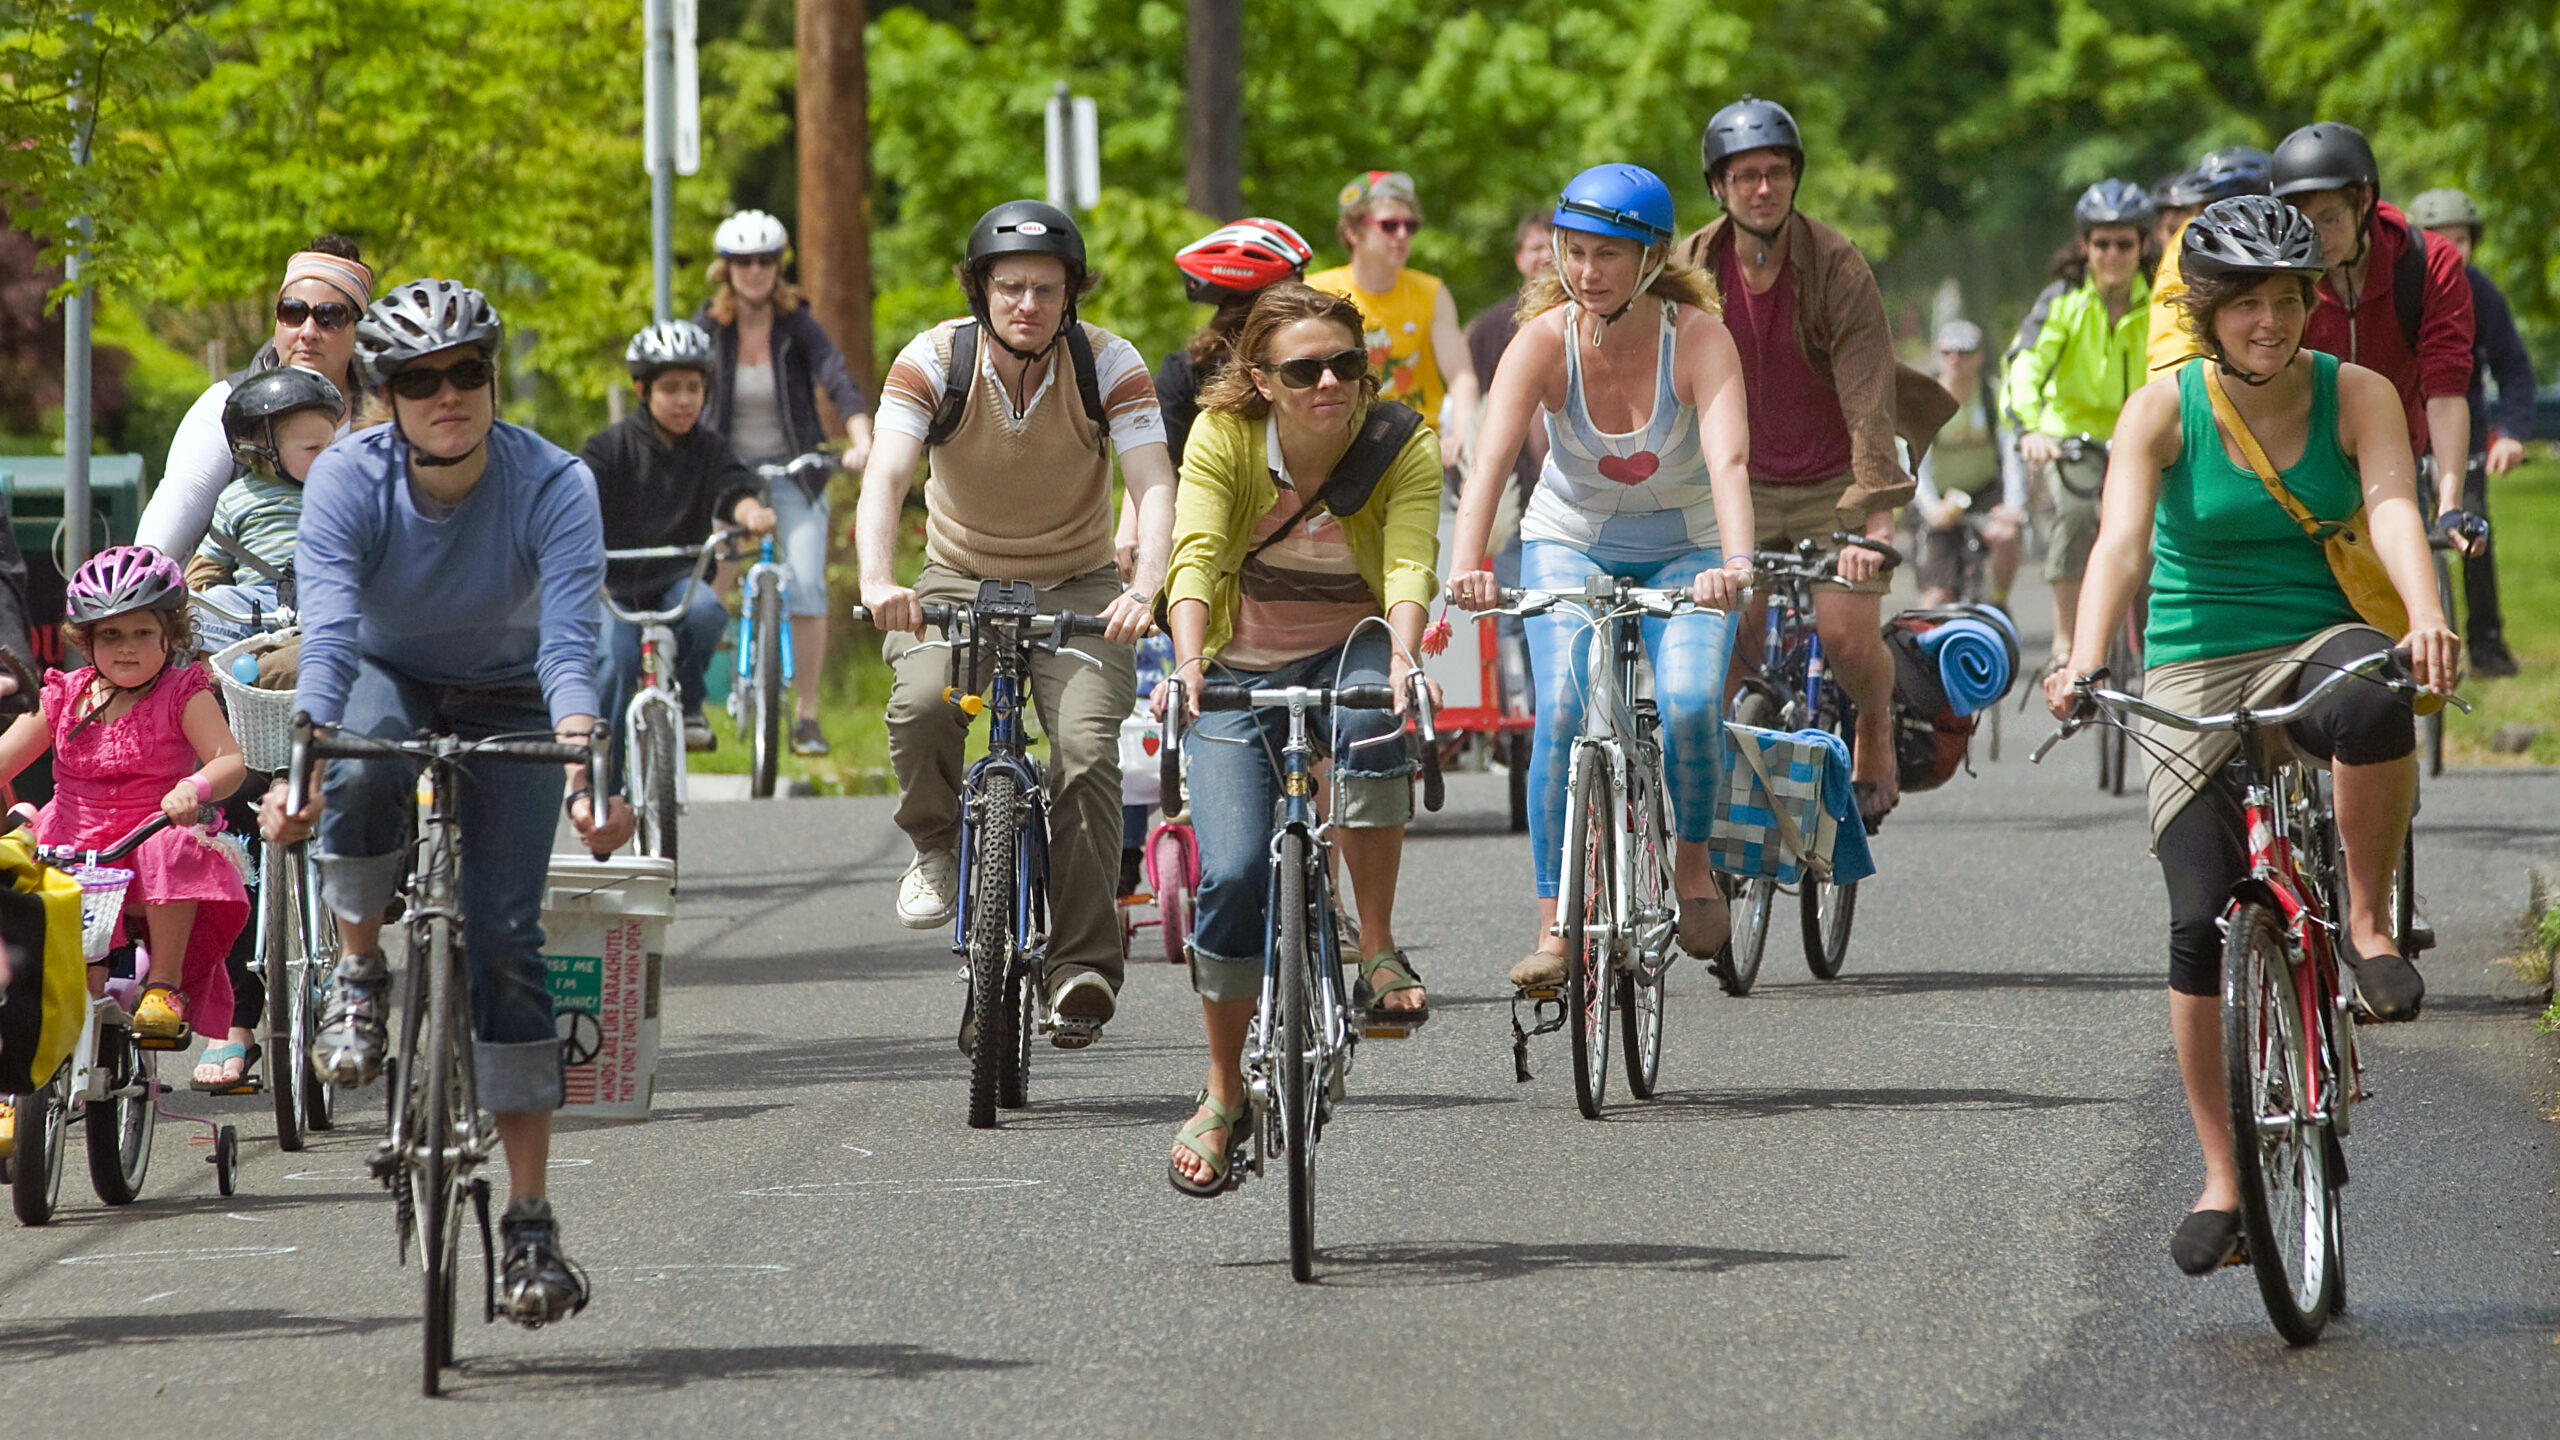 Roswell Moves Festival: A Celebration of Cycling and Community